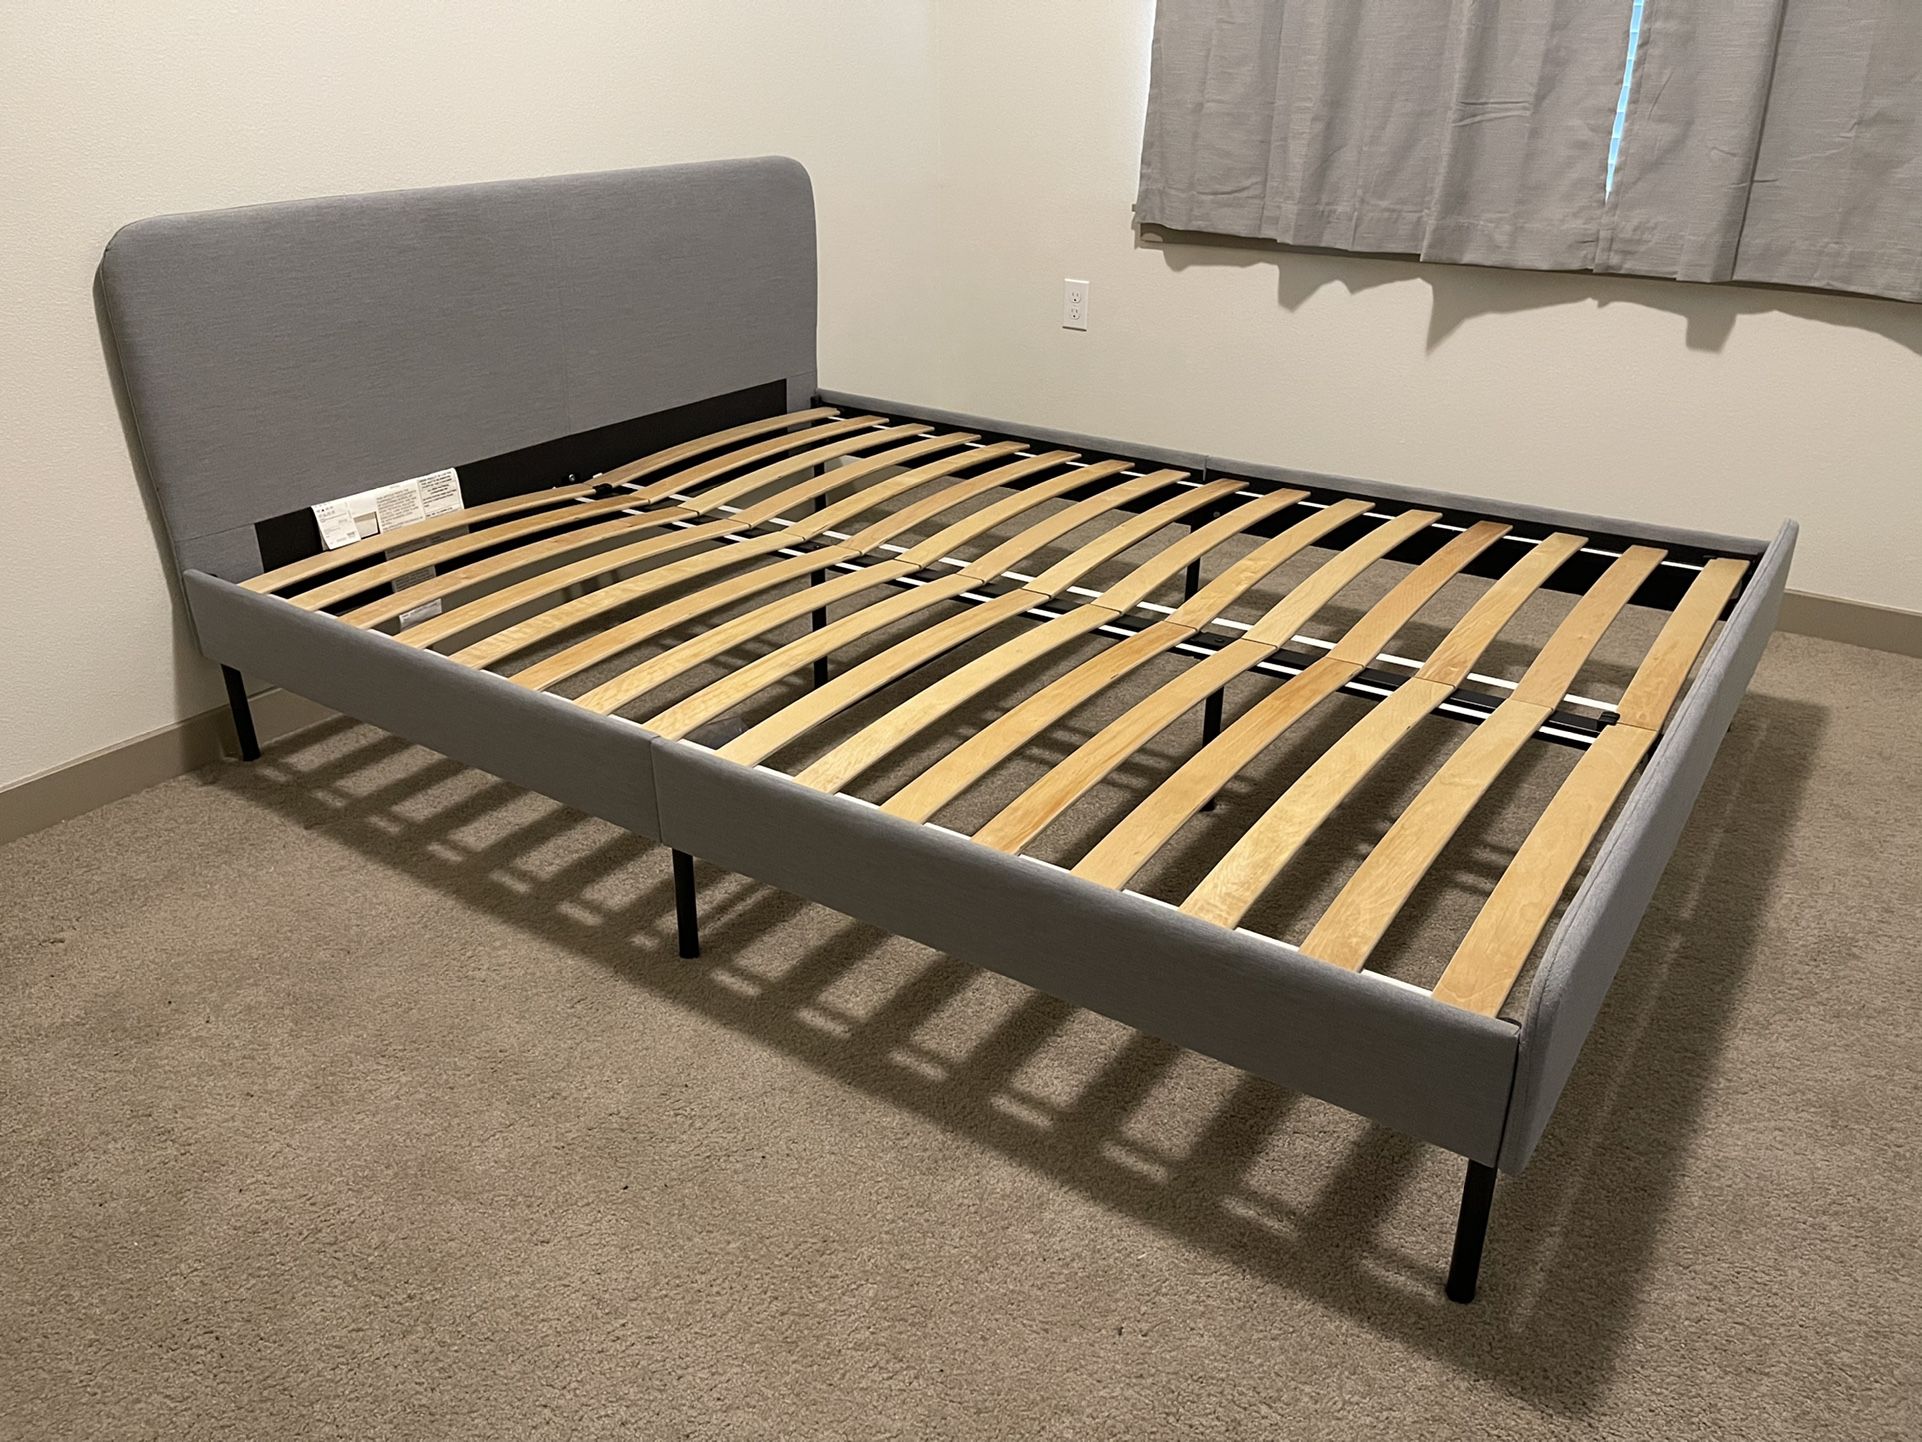 IKEA Queen Sized Bed